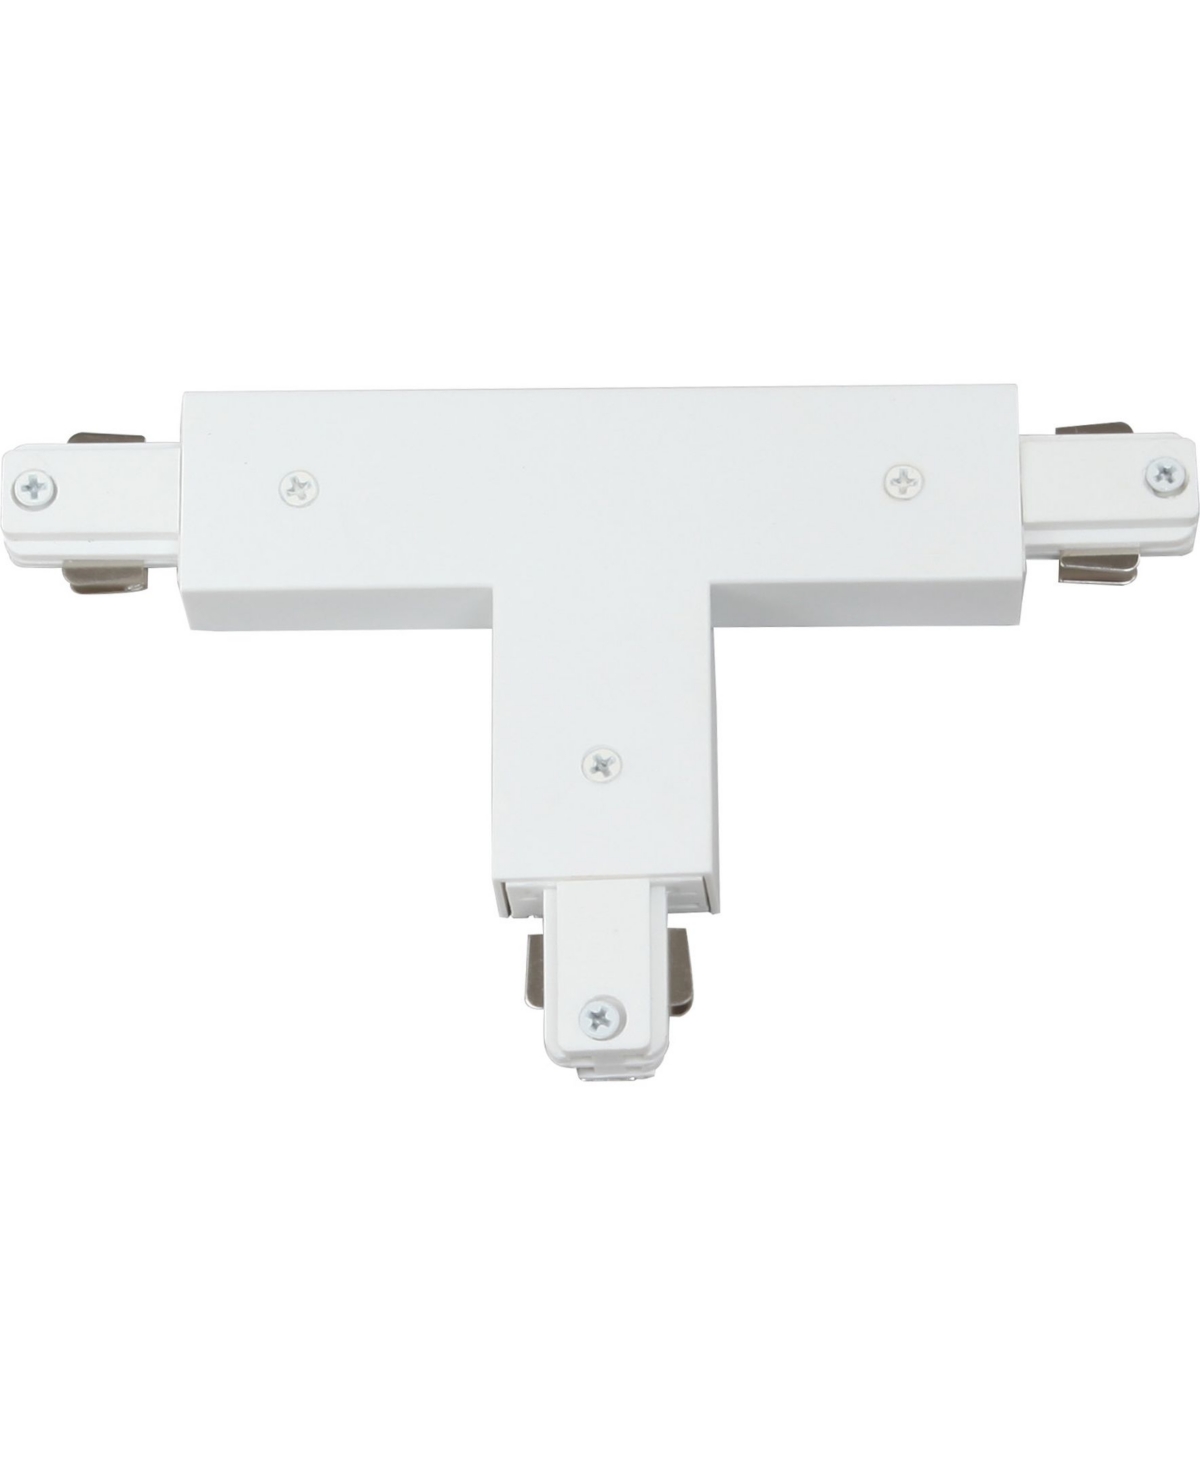 Volume Lighting "t" Connector 120v 2-circuit/1-neutral Track Systems In White